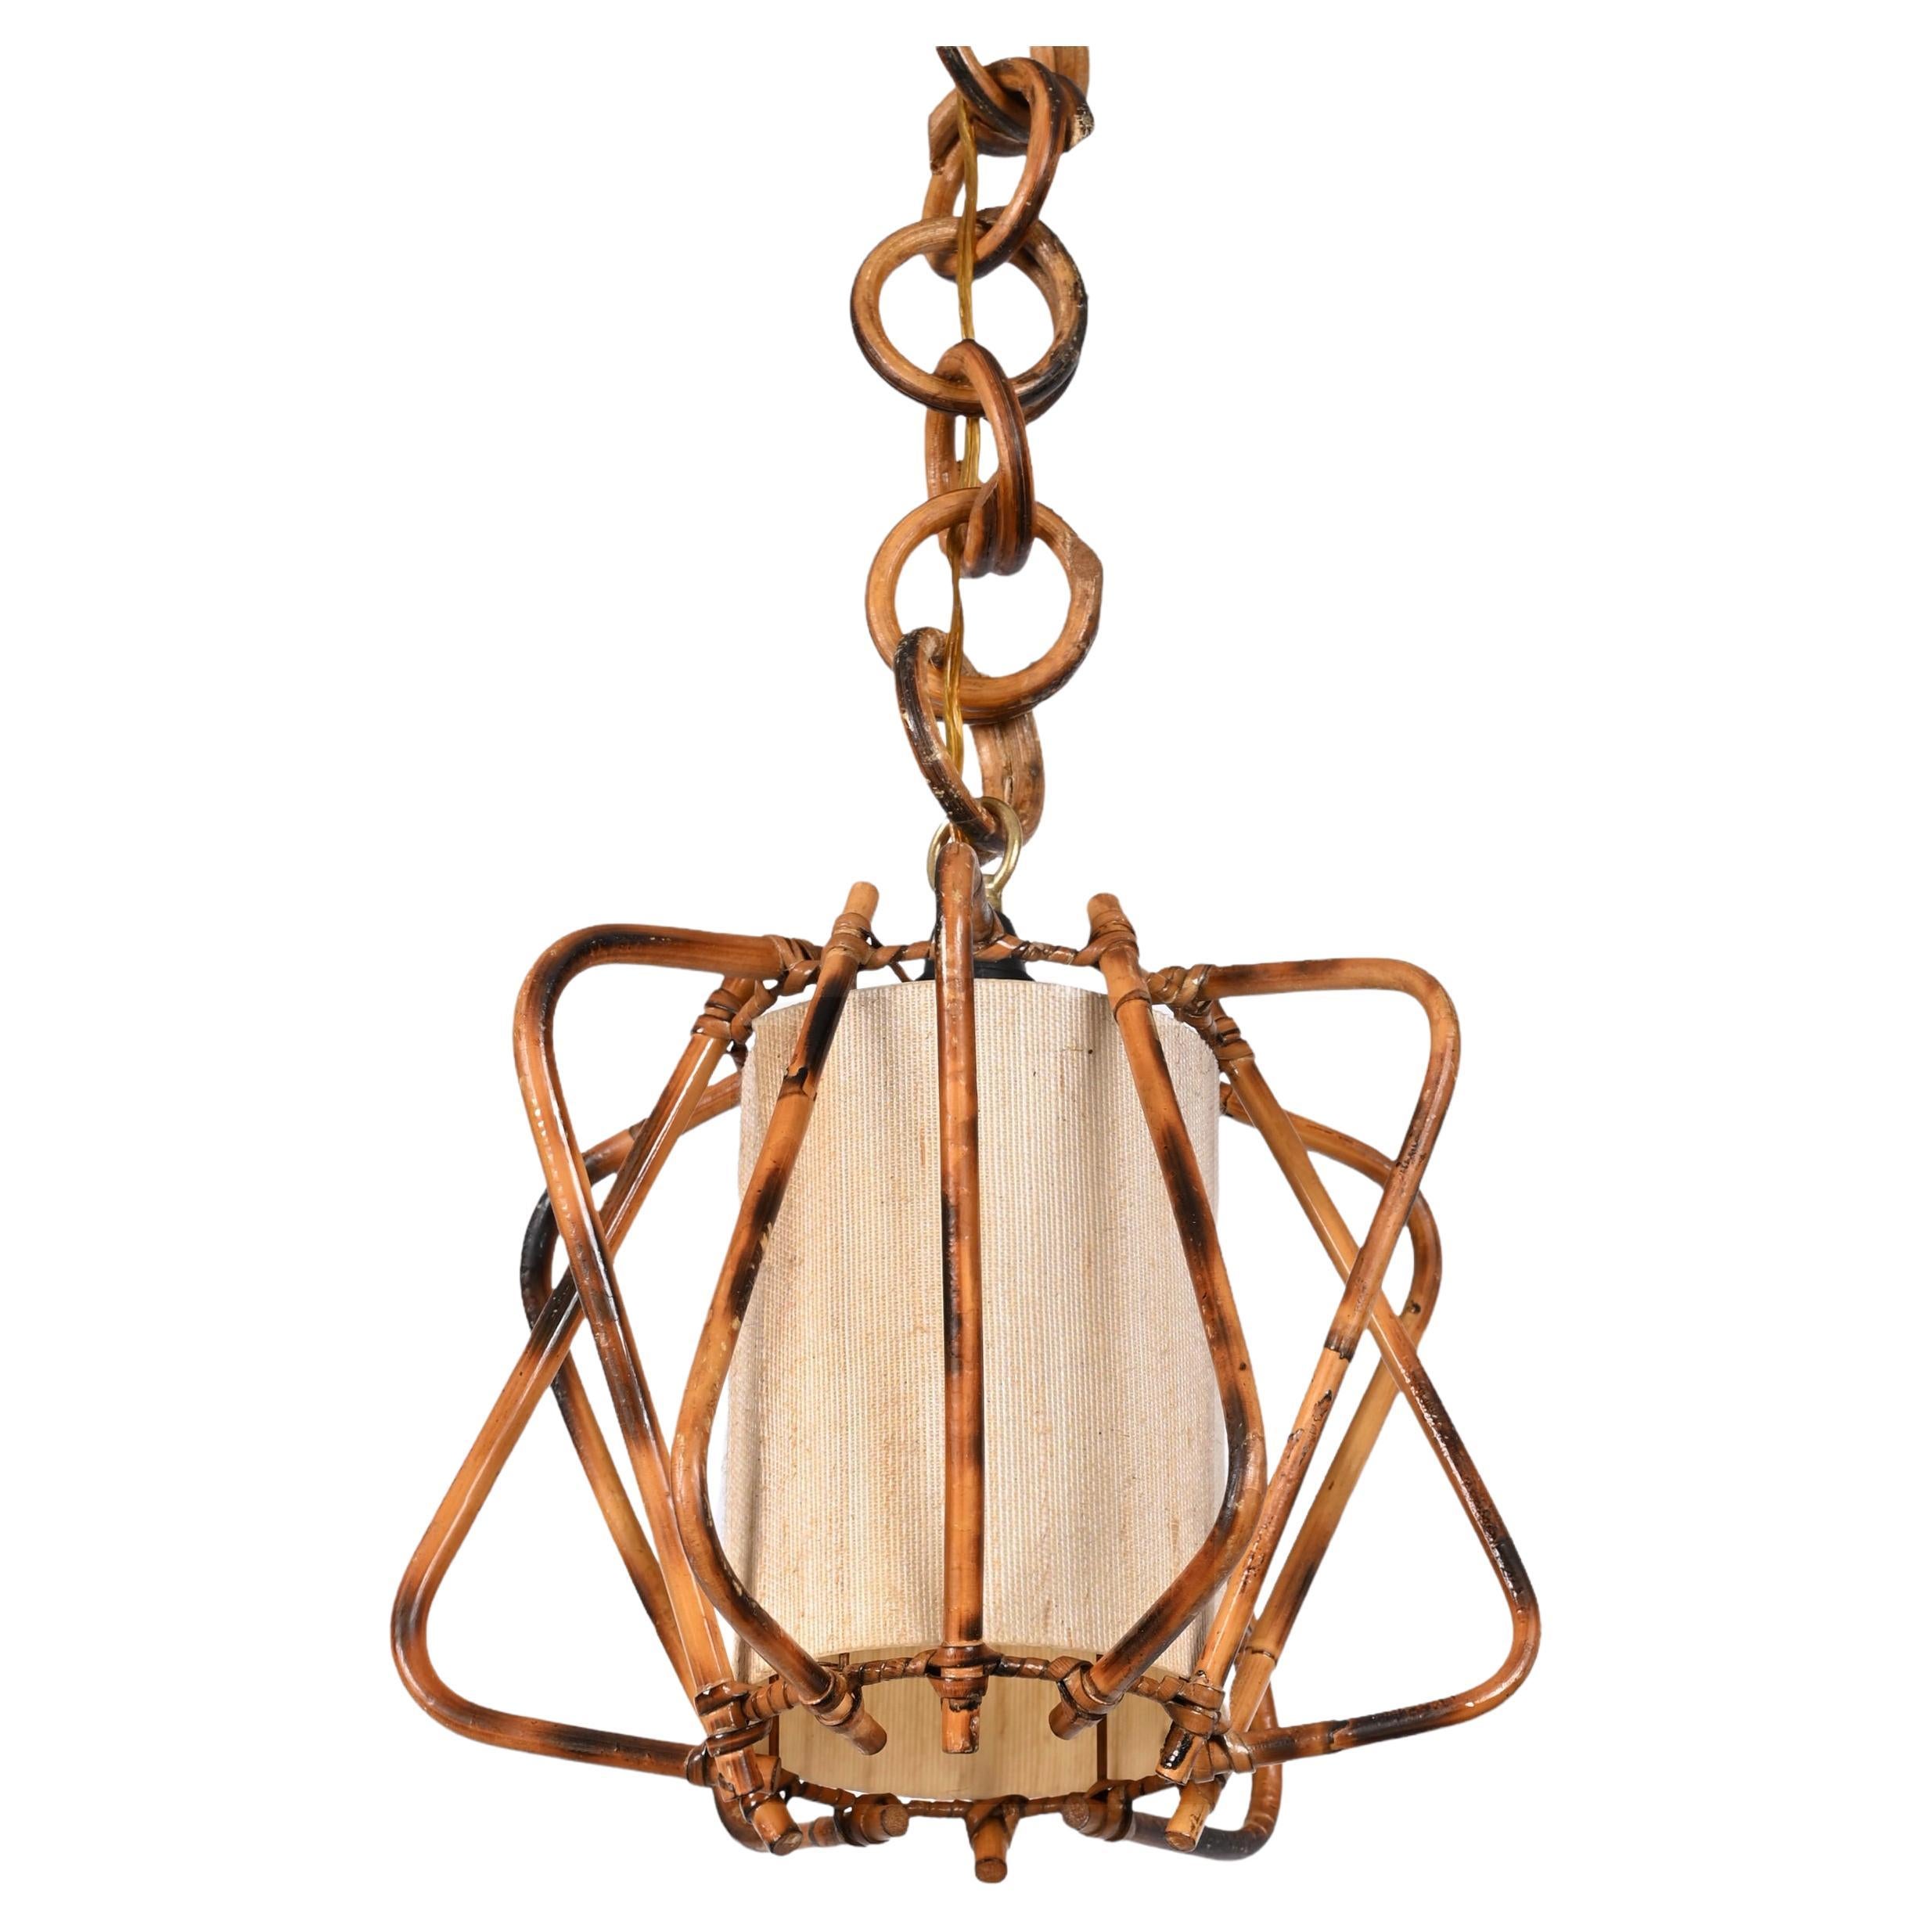 Midcentury Bamboo, Cane and Rattan French Chandelier After Louis Sognot, 1960s